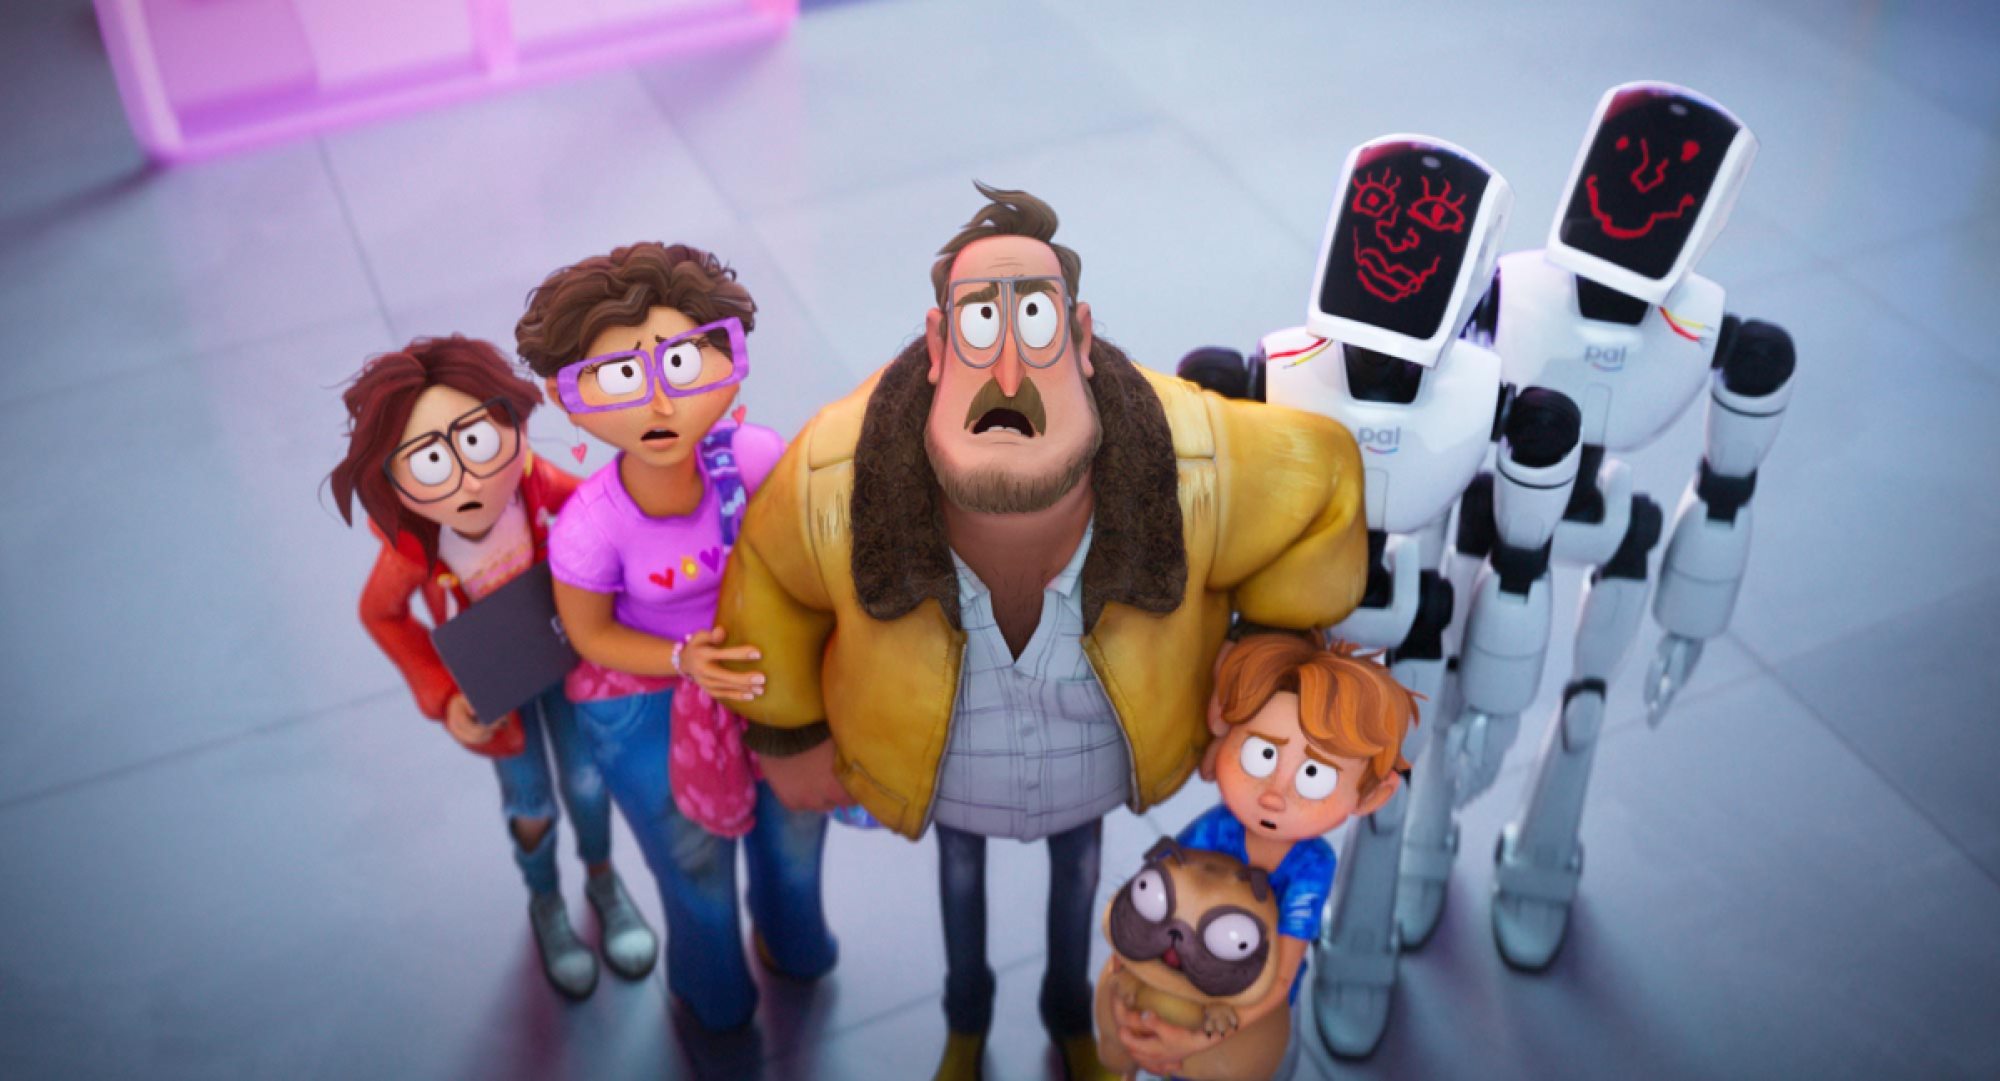 THE MITCHELLS VS. THE MACHINES (L-R) Abbi Jacobson as “Katie Mitchell", Maya Rudolph as “Linda Mitchell", Danny McBride as “Rick Mitchell”, Doug the Pug as “Monchi” and Mike Rianda as “Aaron Mitchell”.